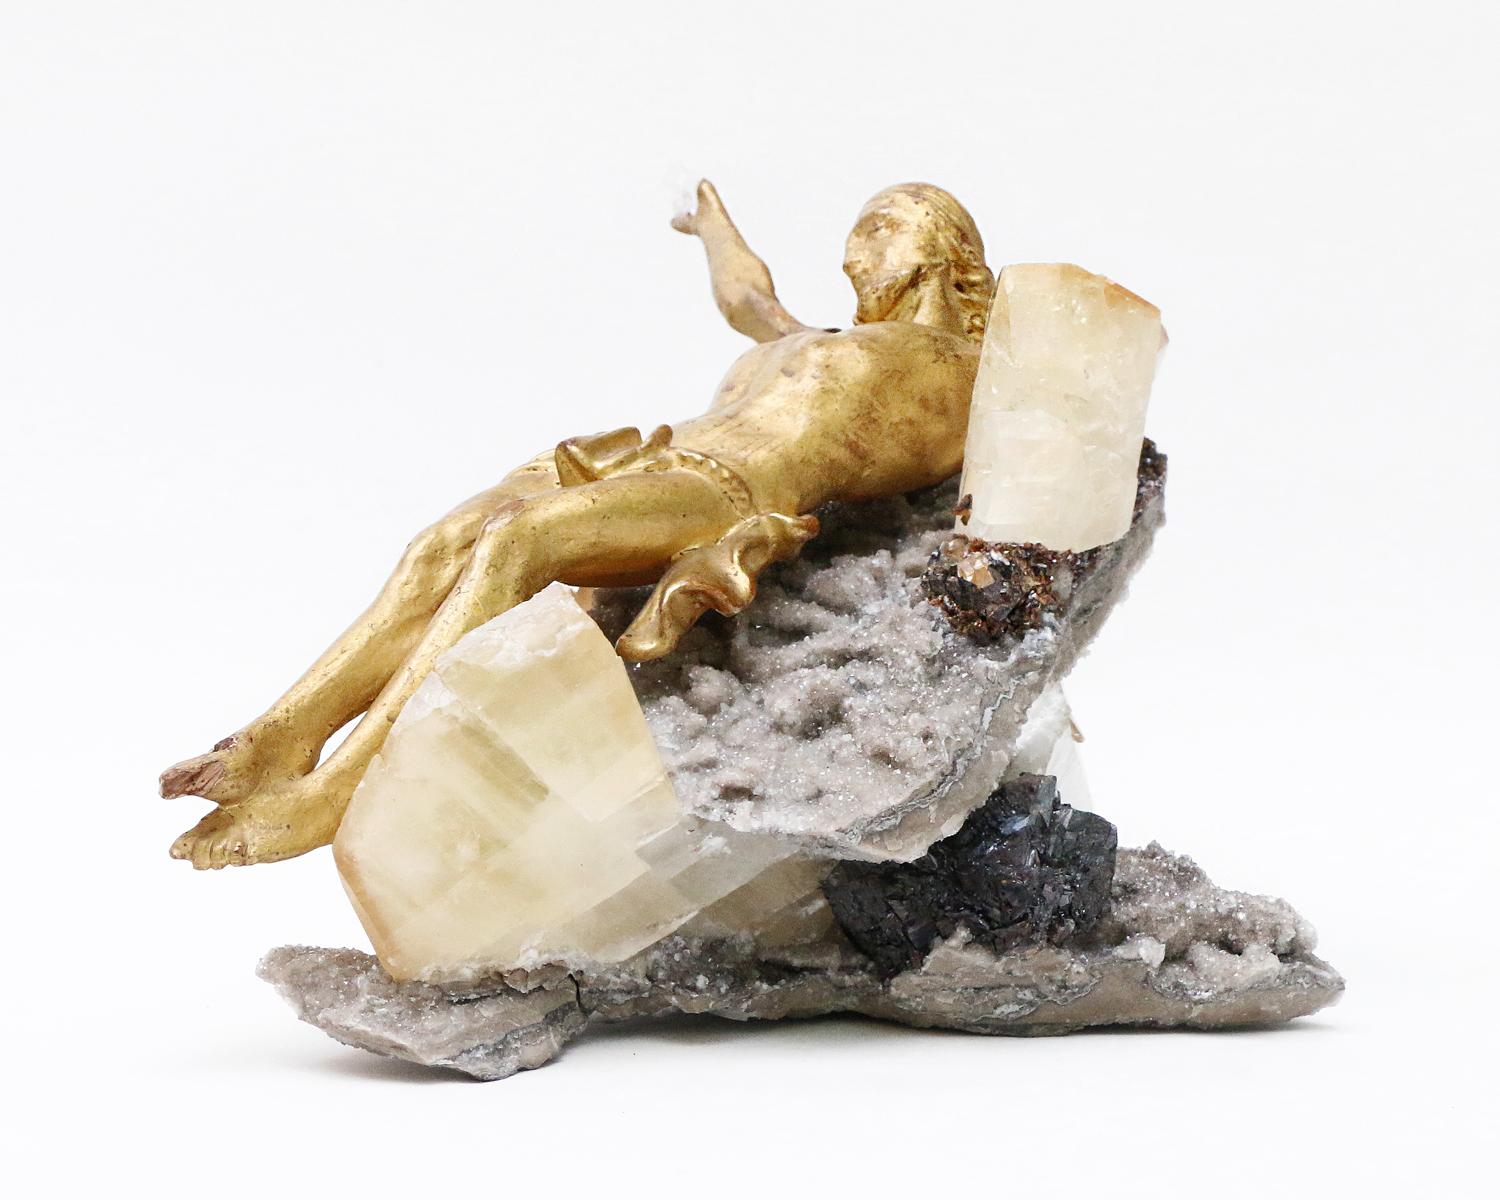 Sculptural 18th century Italian gold leaf wood fragment figure of Christ (Florence) on calcite crystal cluster in matrix. 

The calcite crystal cluster is from Elmwood Mine, Tennessee. It is an example of the world's finest crystallized calcite.